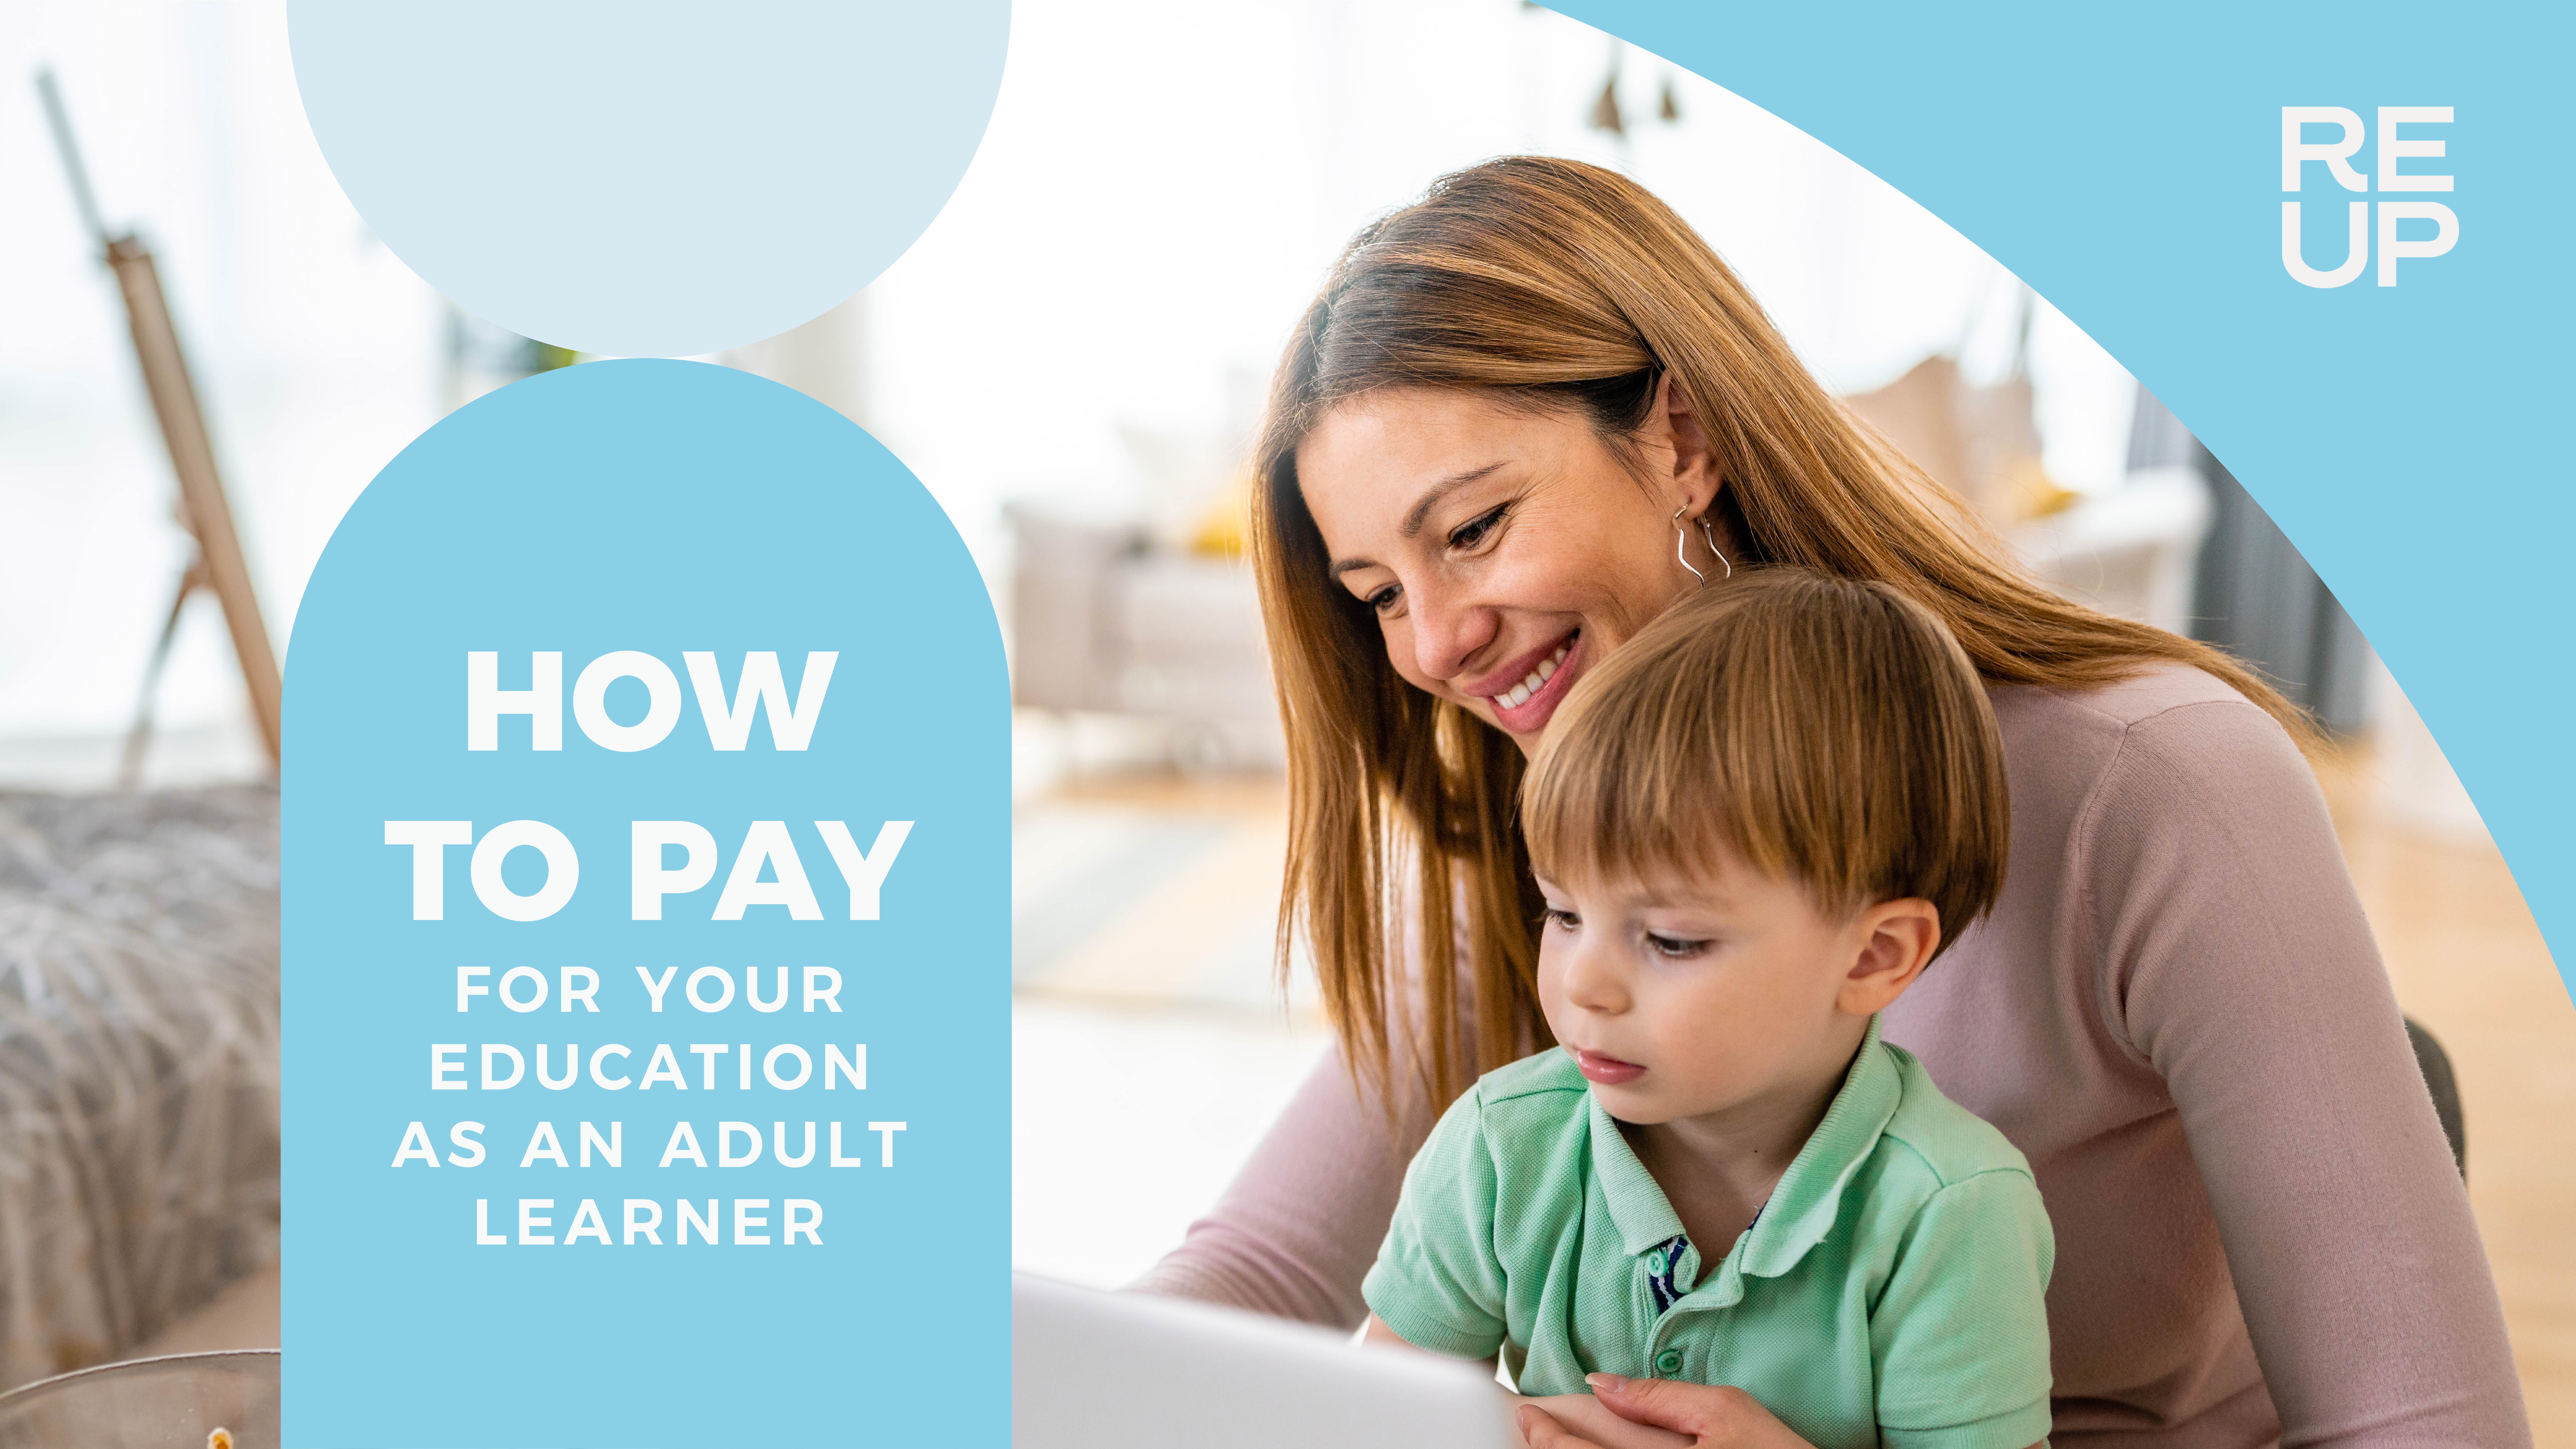 How to Pay for Your Education as an Adult Learner